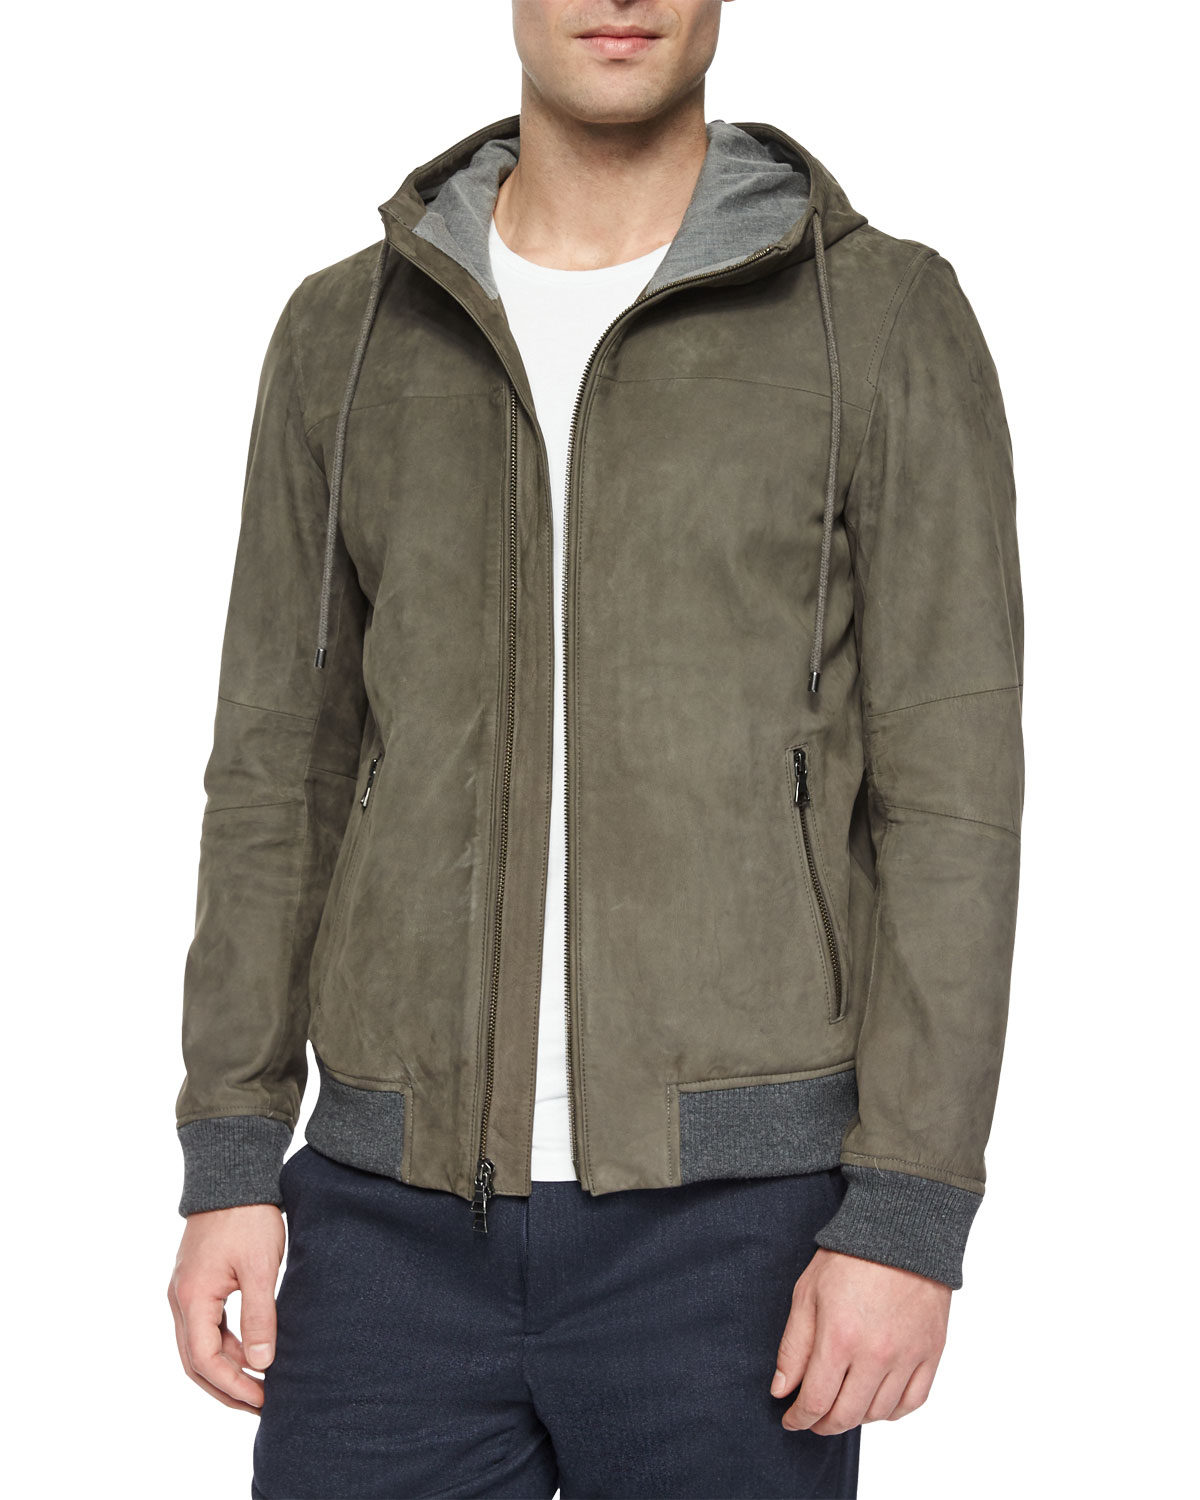 Vince Nubuck Leather Hooded Jacket in Brown for Men - Lyst